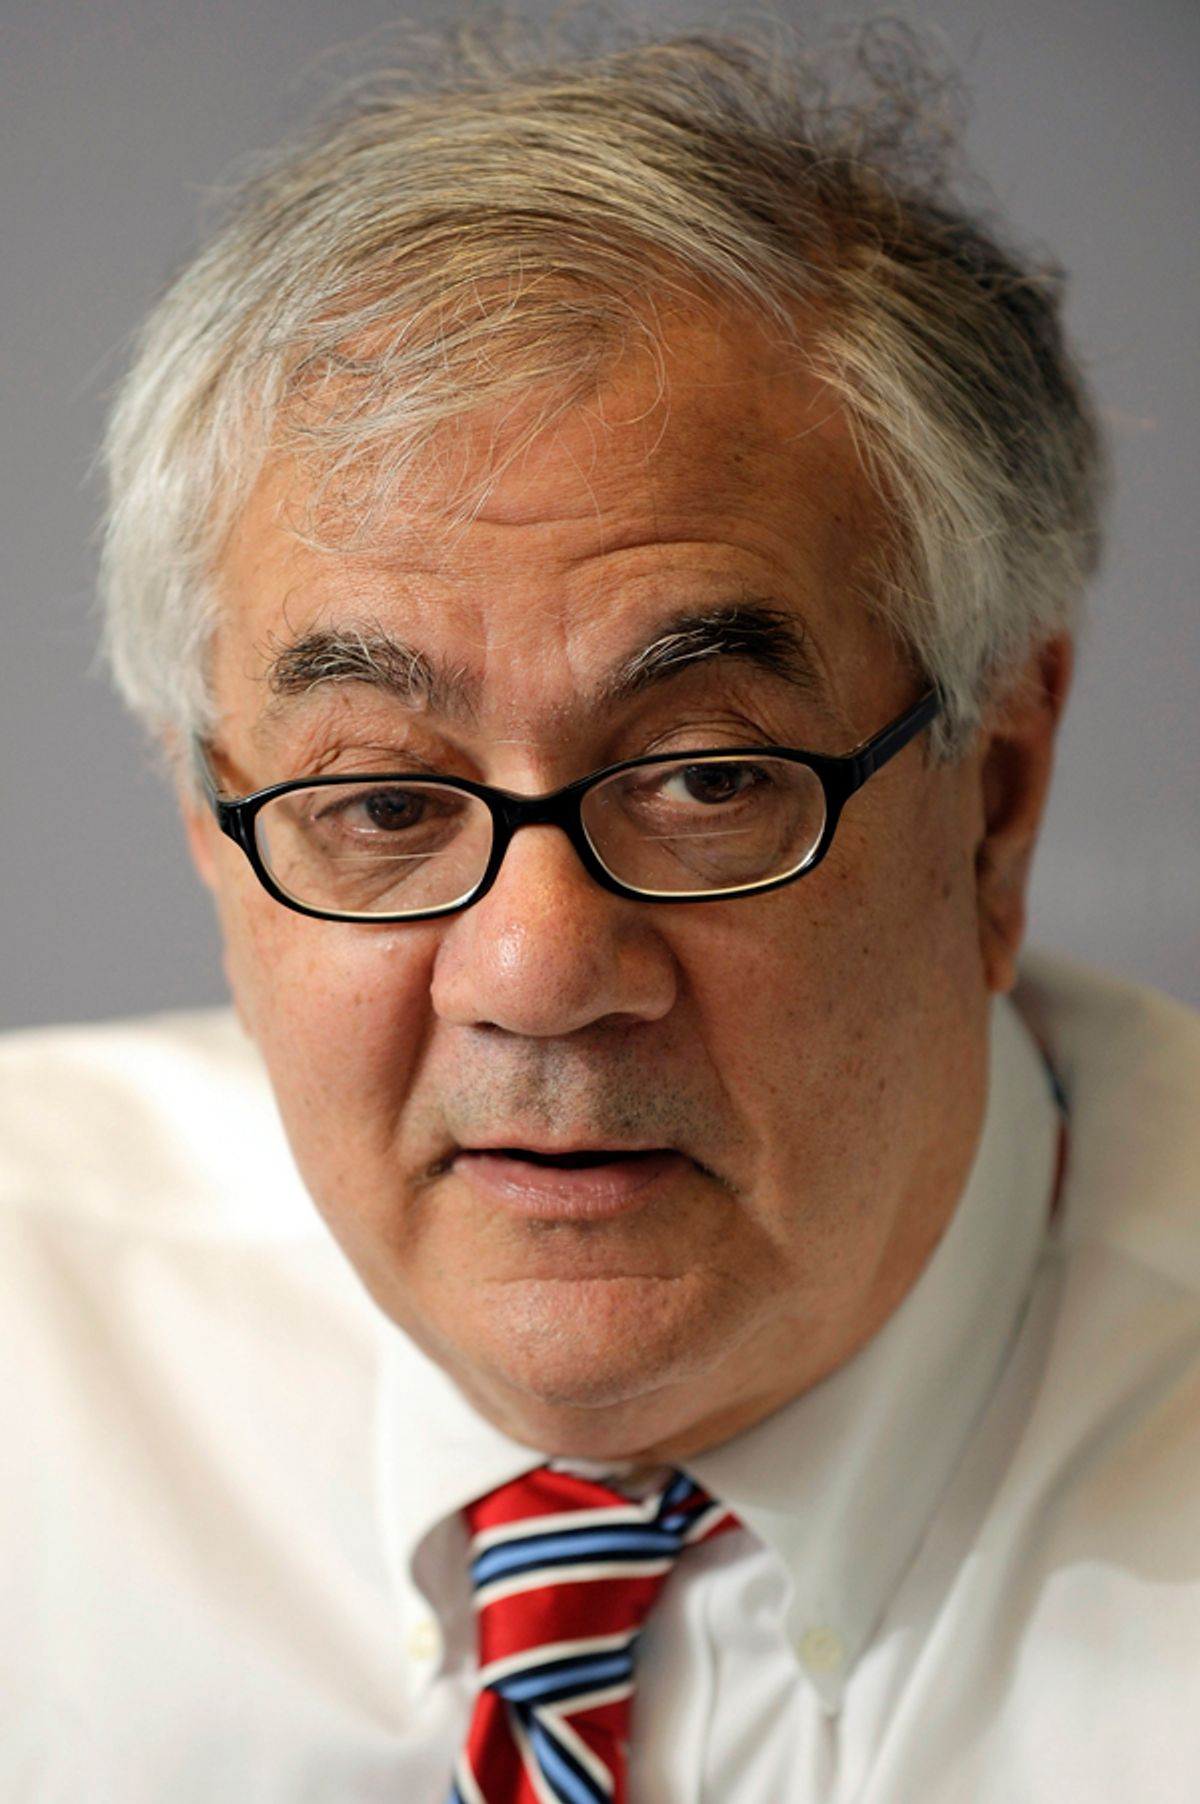 U.S. Representative Barney Frank (D-MA), Chairman of the House Financial Services Committee, participates in the Reuters Global Financial Regulation Summit in Washington, April 28, 2009.  REUTERS/Jonathan Ernst (UNITED STATES POLITICS BUSINESS HEADSHOT) (Â© Jonathan Ernst / Reuters)